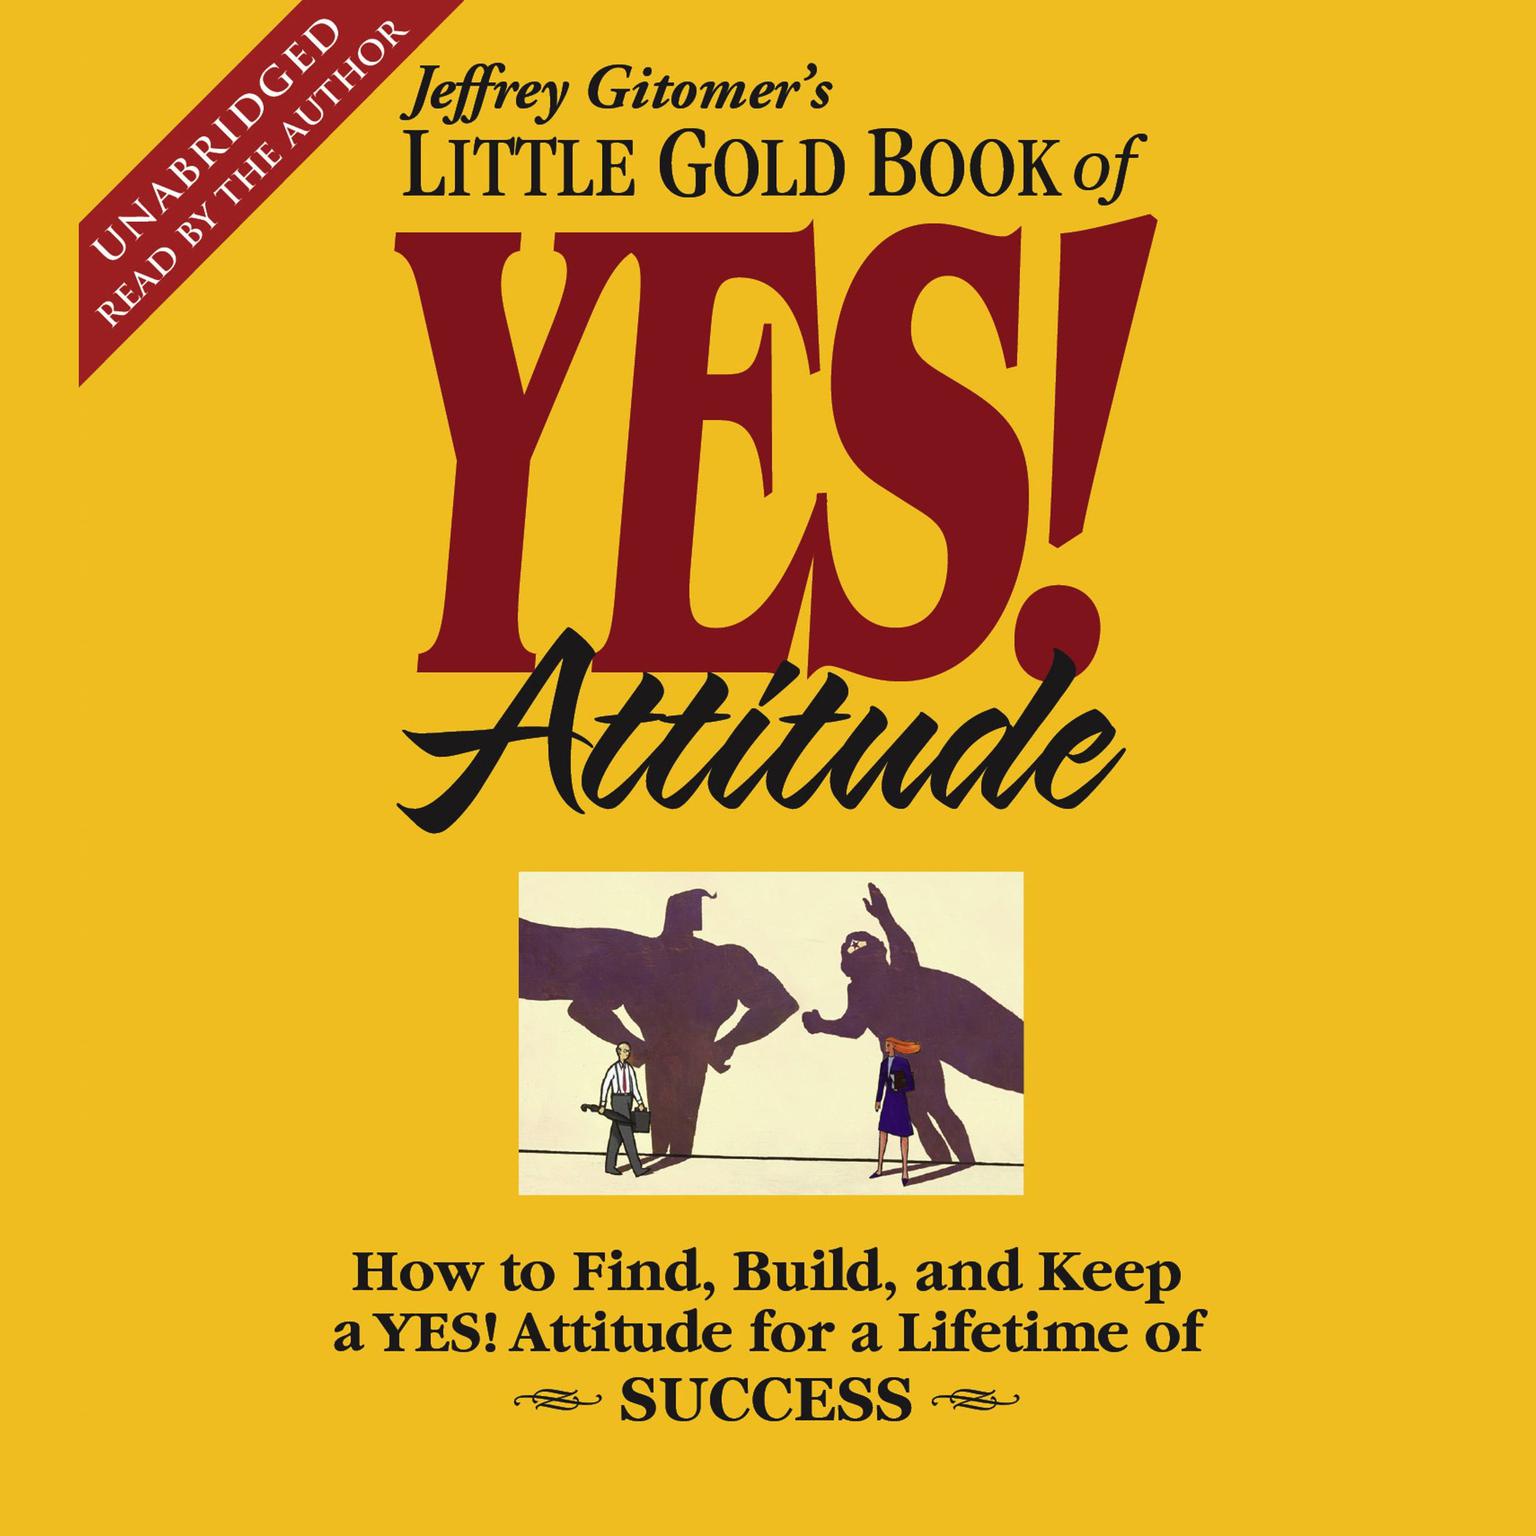 The Little Gold Book of YES! Attitude: How to Find, Build and Keep a YES! Attitude for a Lifetime of Success Audiobook, by Jeffrey Gitomer